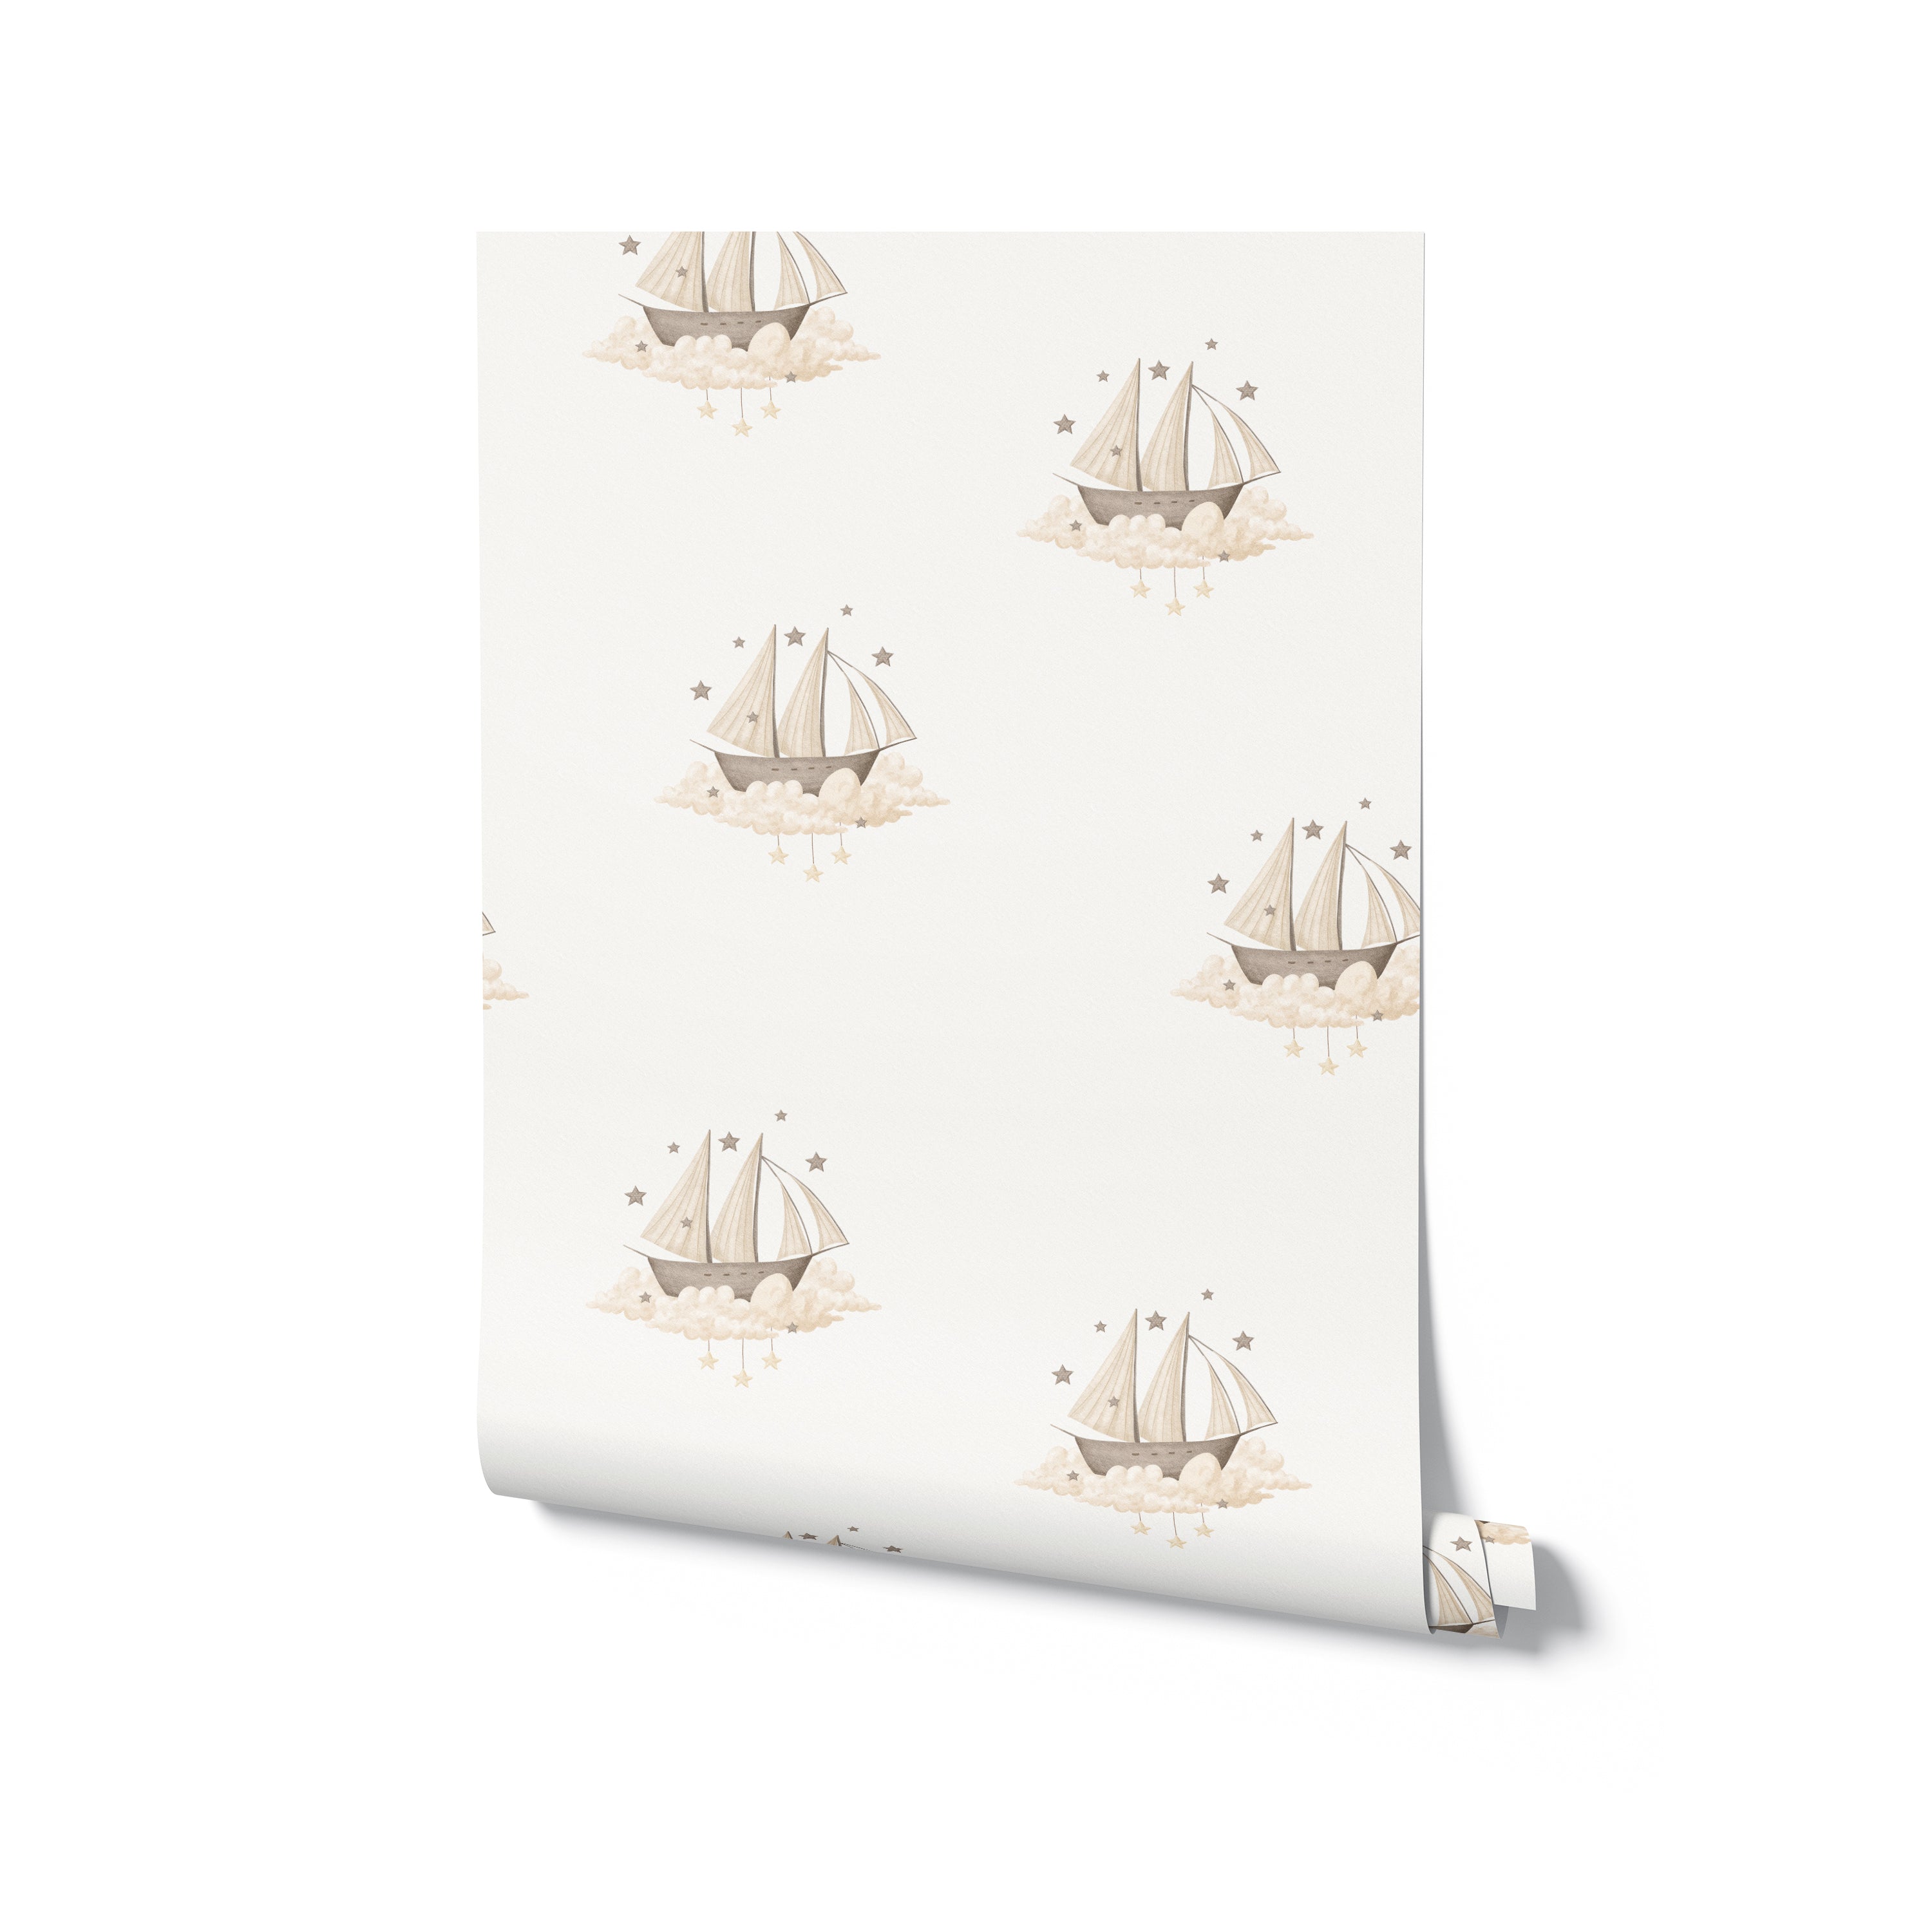 A rolled sheet of Dreamy Sailboats Wallpaper, displaying the sailboat and cloud design, perfect for a whimsical, nautical-themed space.